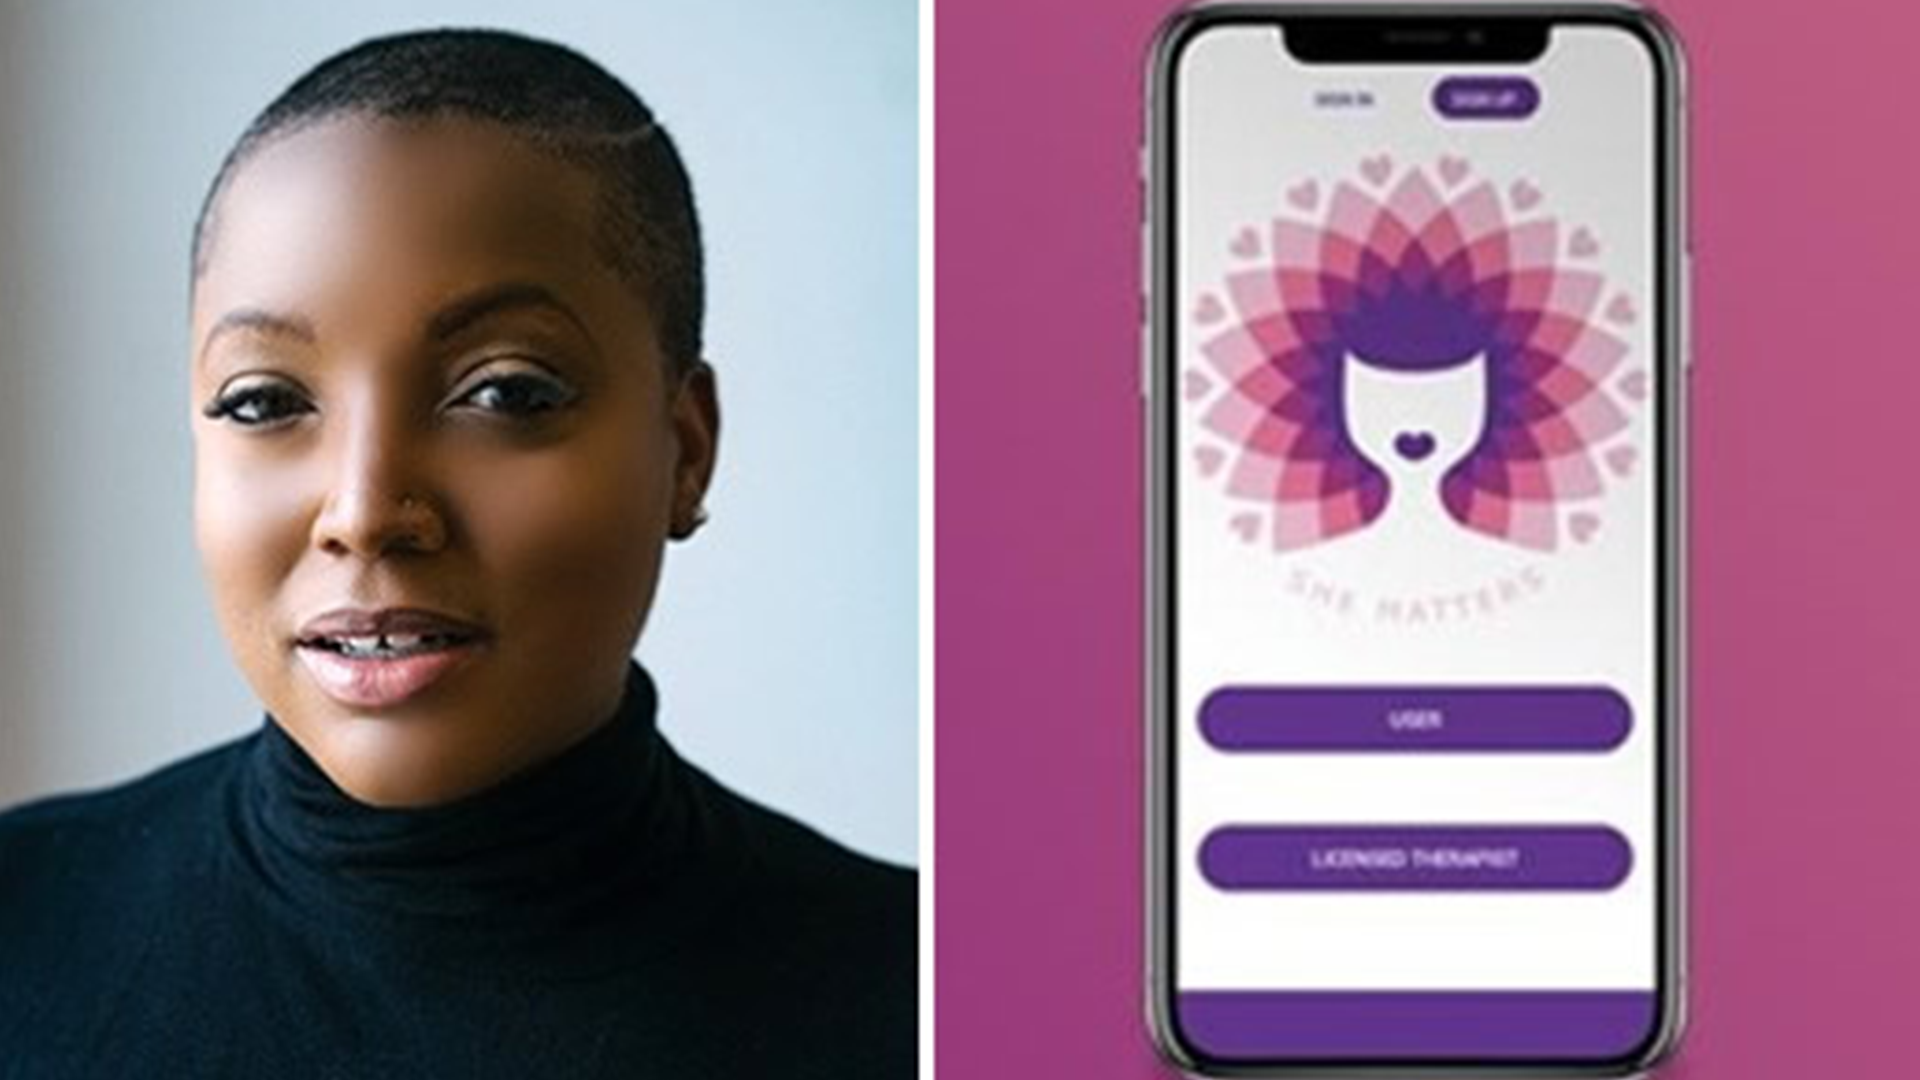 Why Jade Kearney Founded A Platform To Connect Black Women With Culturally Competent Healthcare Professionals